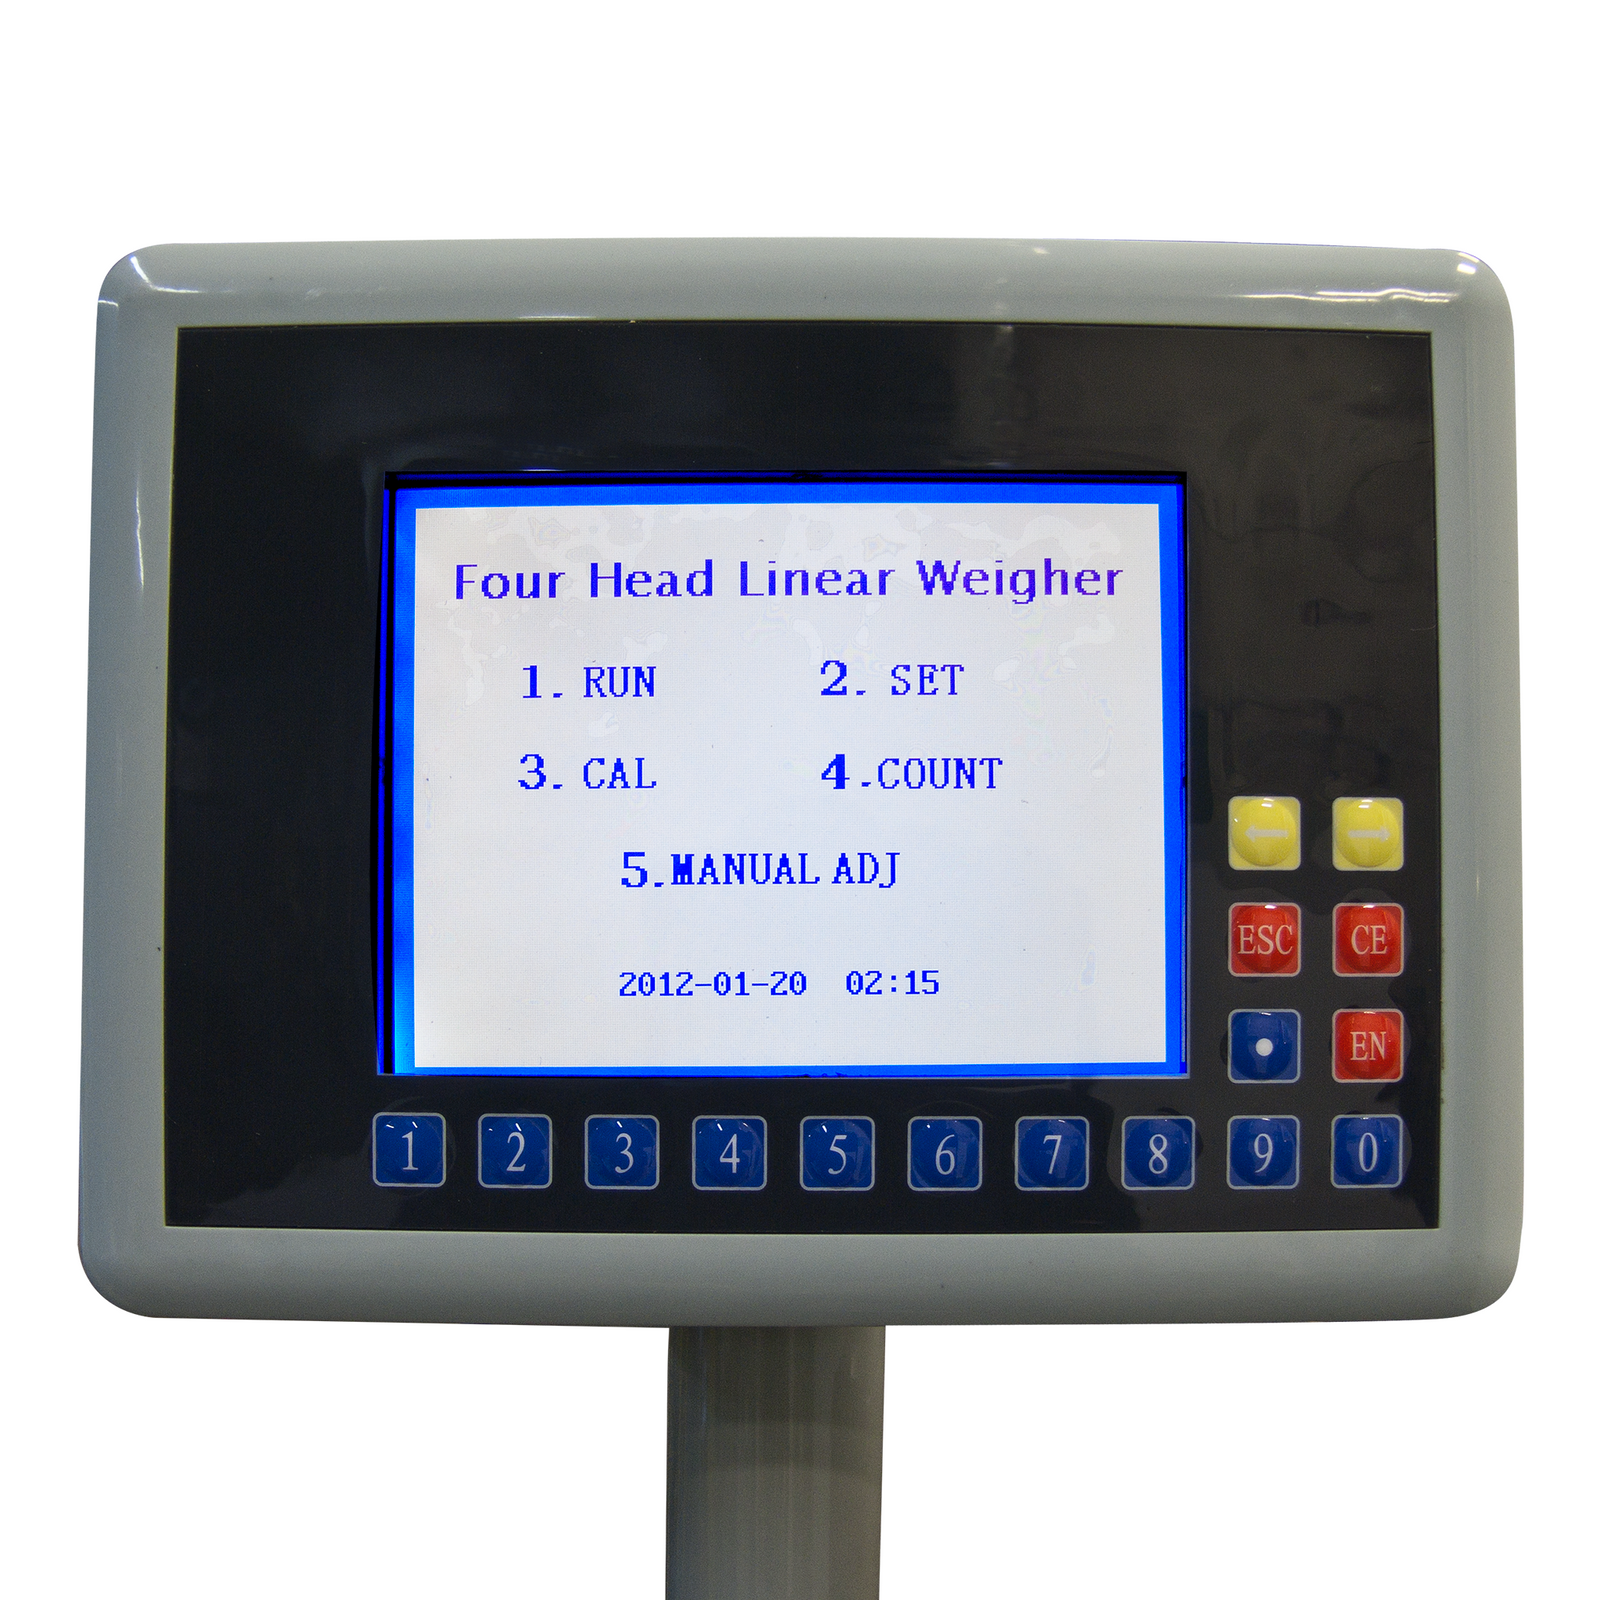 Control panel with LCD display on a JORESTECH® 4 head linear weigh machine. The screen is on and shows the options of Run, Set, Calibrate, Count, and Manual adjustment